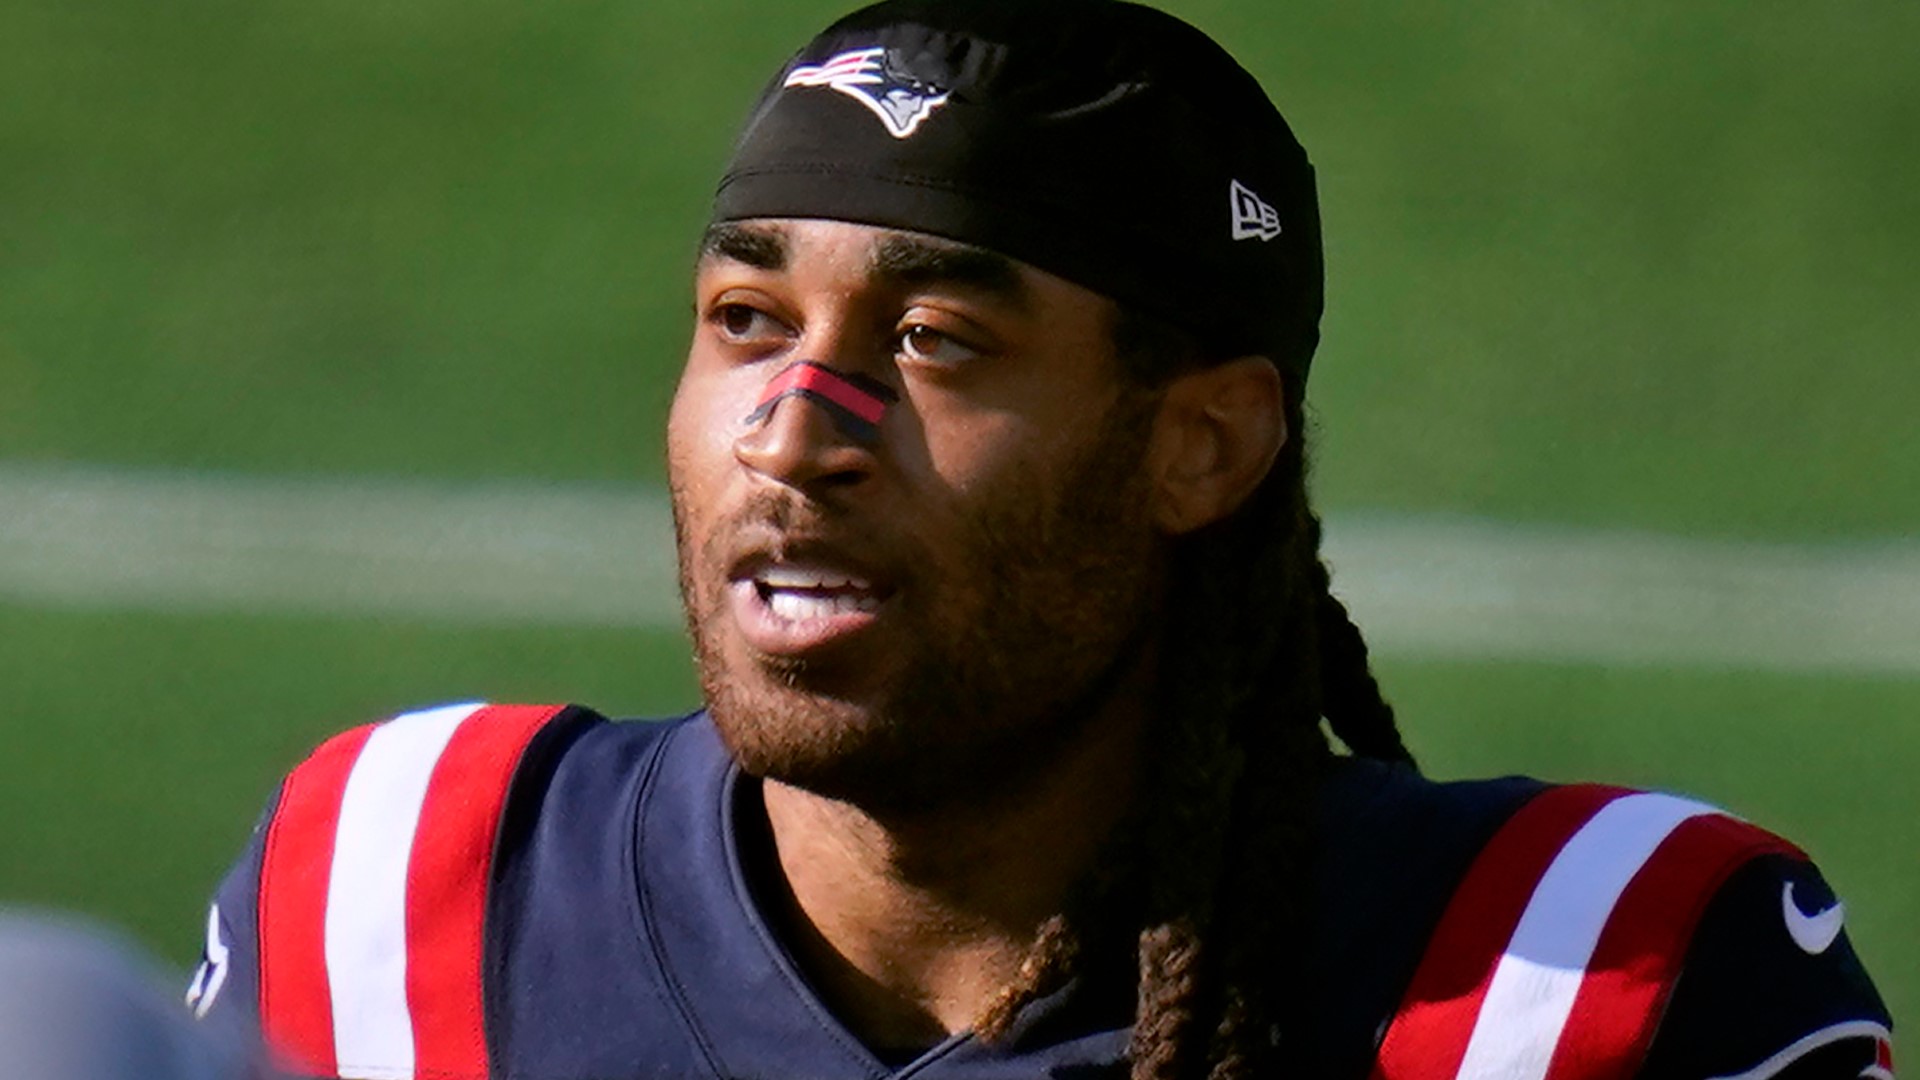 Carolina Panthers fans were buzzing with excitement after the team made a trade for 2019 NFL Defensive Player of the Year Stephon Gilmore.